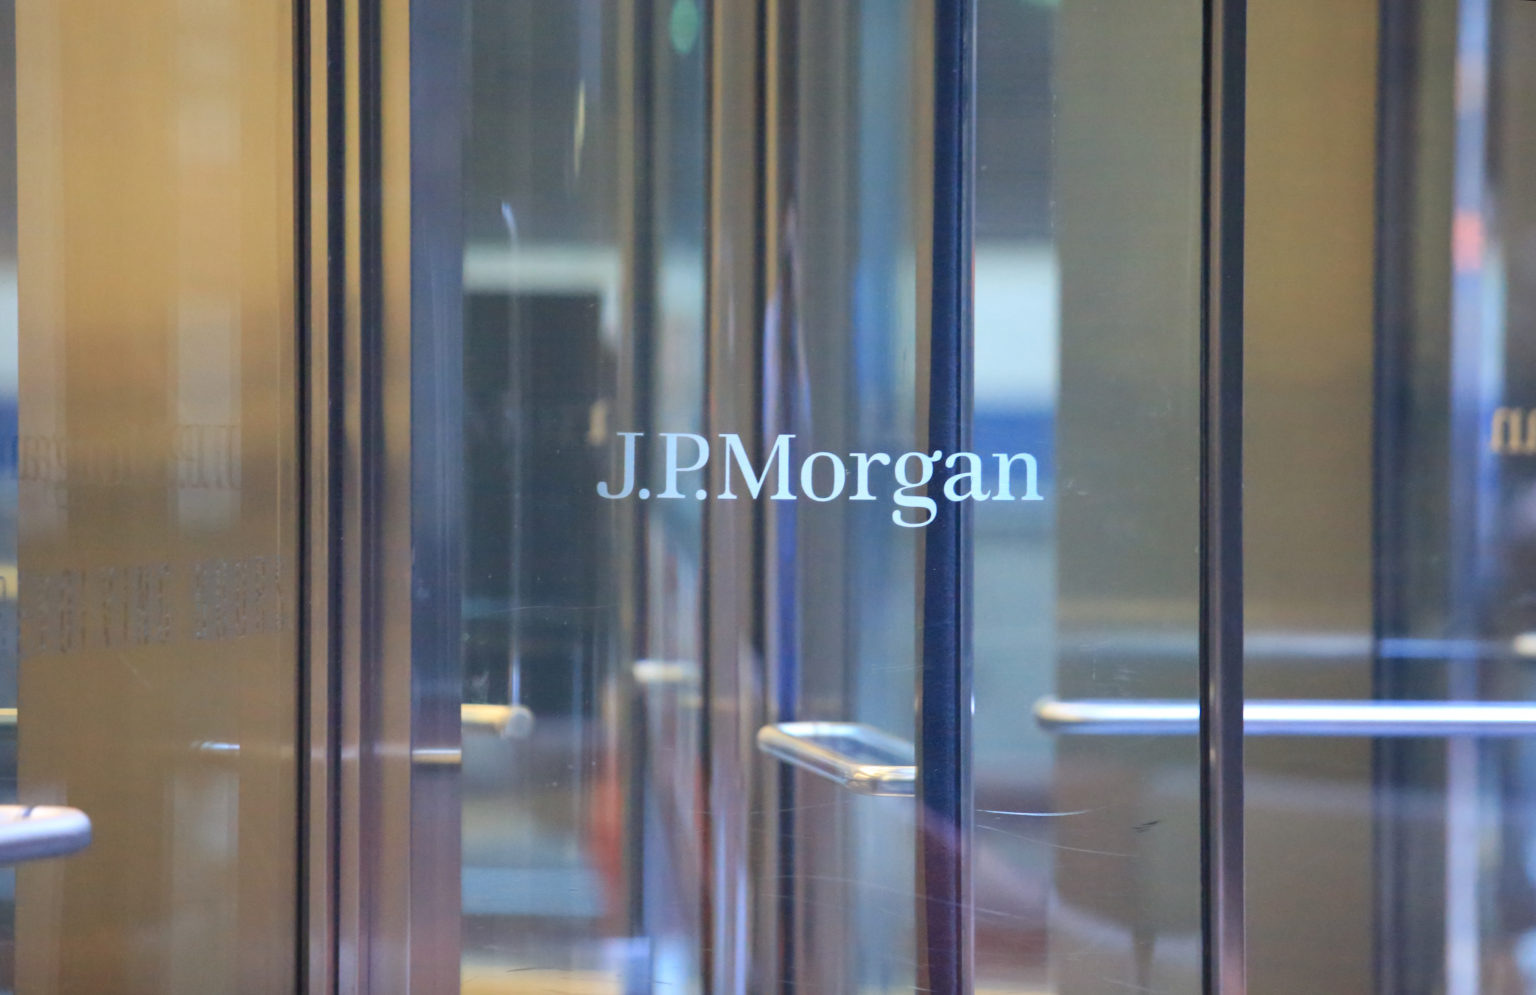 Ex-JPMorgan gold traders ask for no prison time in spoofing case